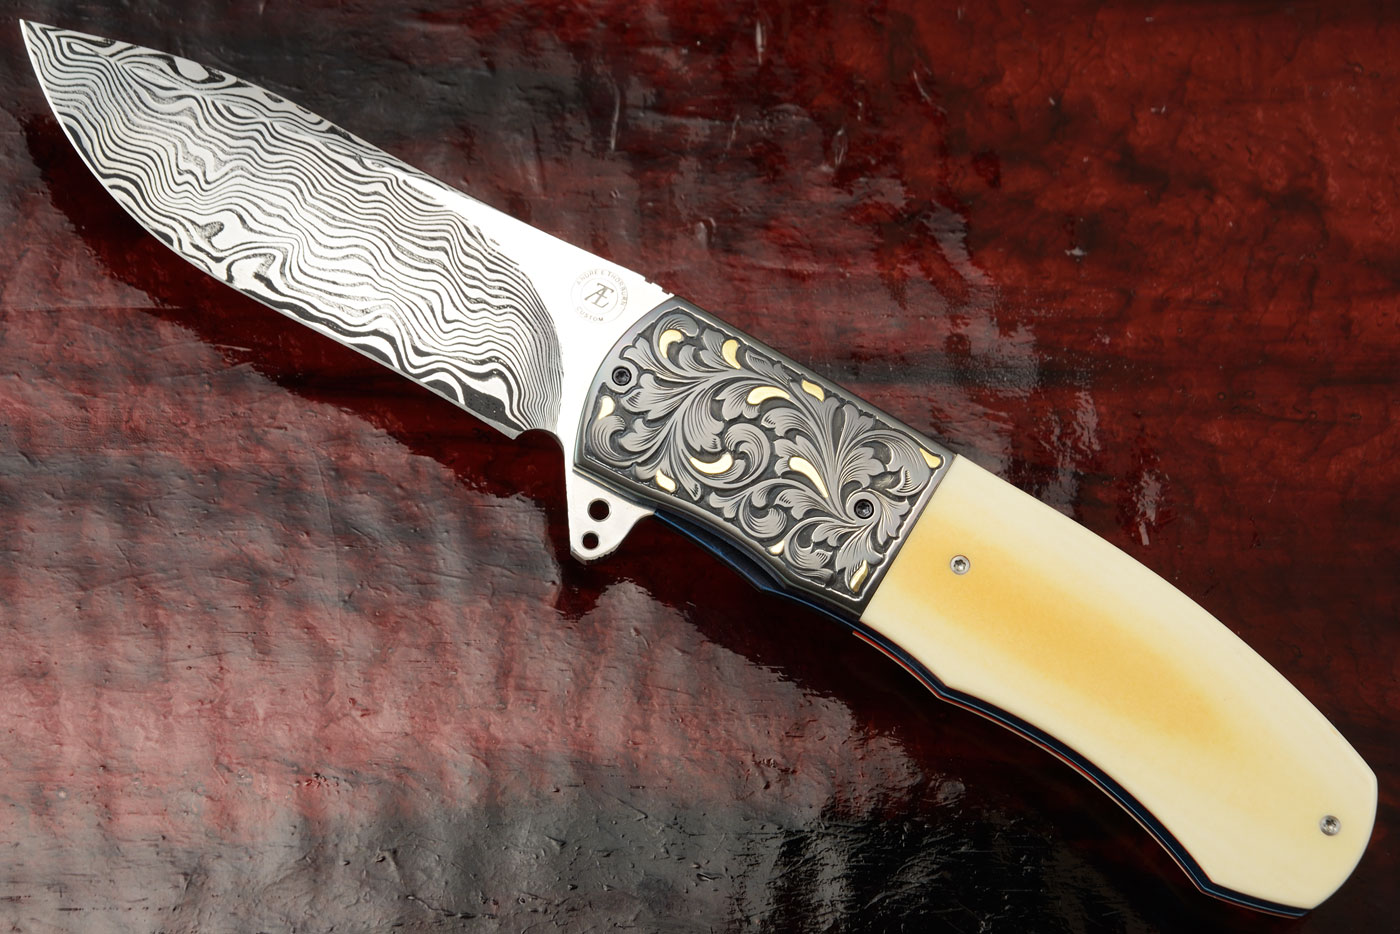 L46 Flipper with Antique Westinghouse Micarta, Damascus, and Engraved Zirconium with Gold Inlays (Ceramic IKBS)